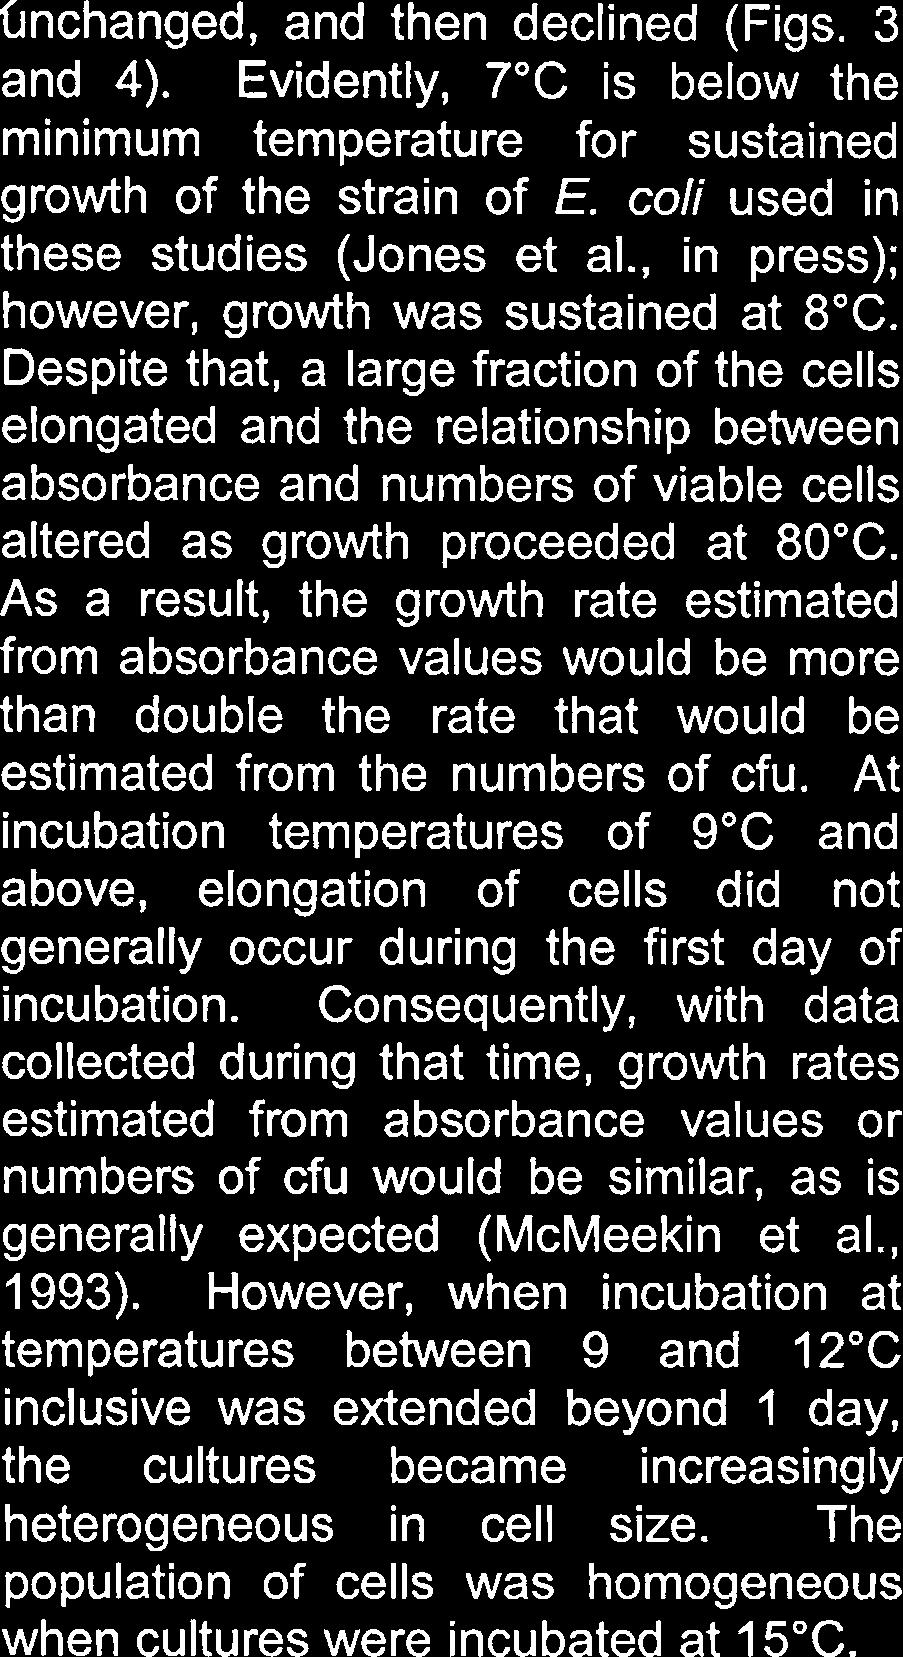 nchanged, and then declined (Figs. 3 and 4). Evidently, 7 C is below the minimum temperature for sustained growth of the strain of E. coli used in these studies (Jones et al.